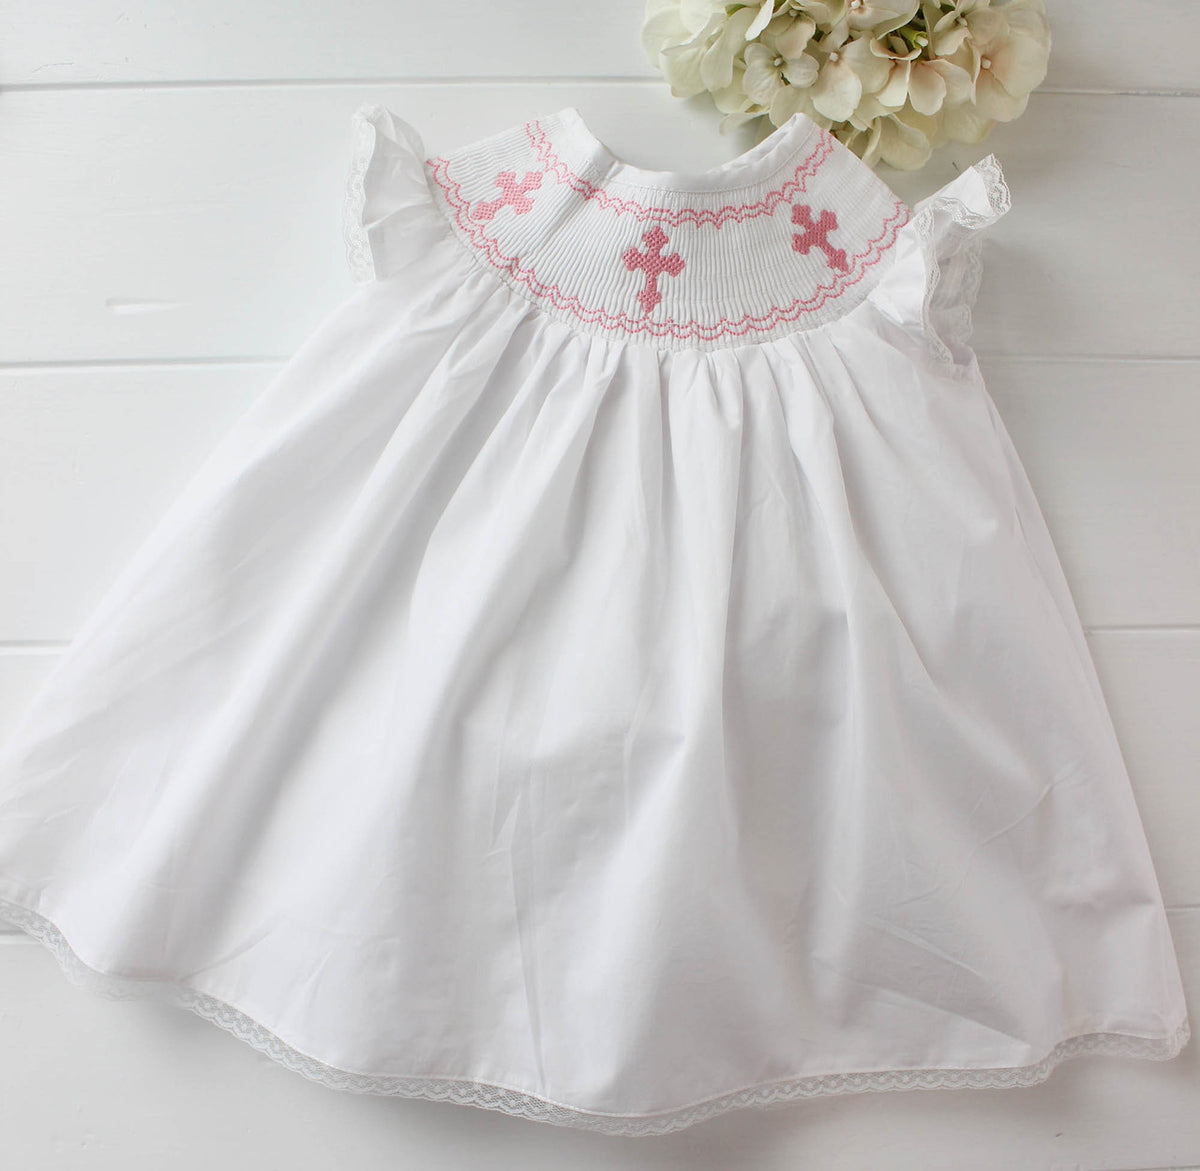 Girls White Dress Pink Smocked Crosses Christening Outfit